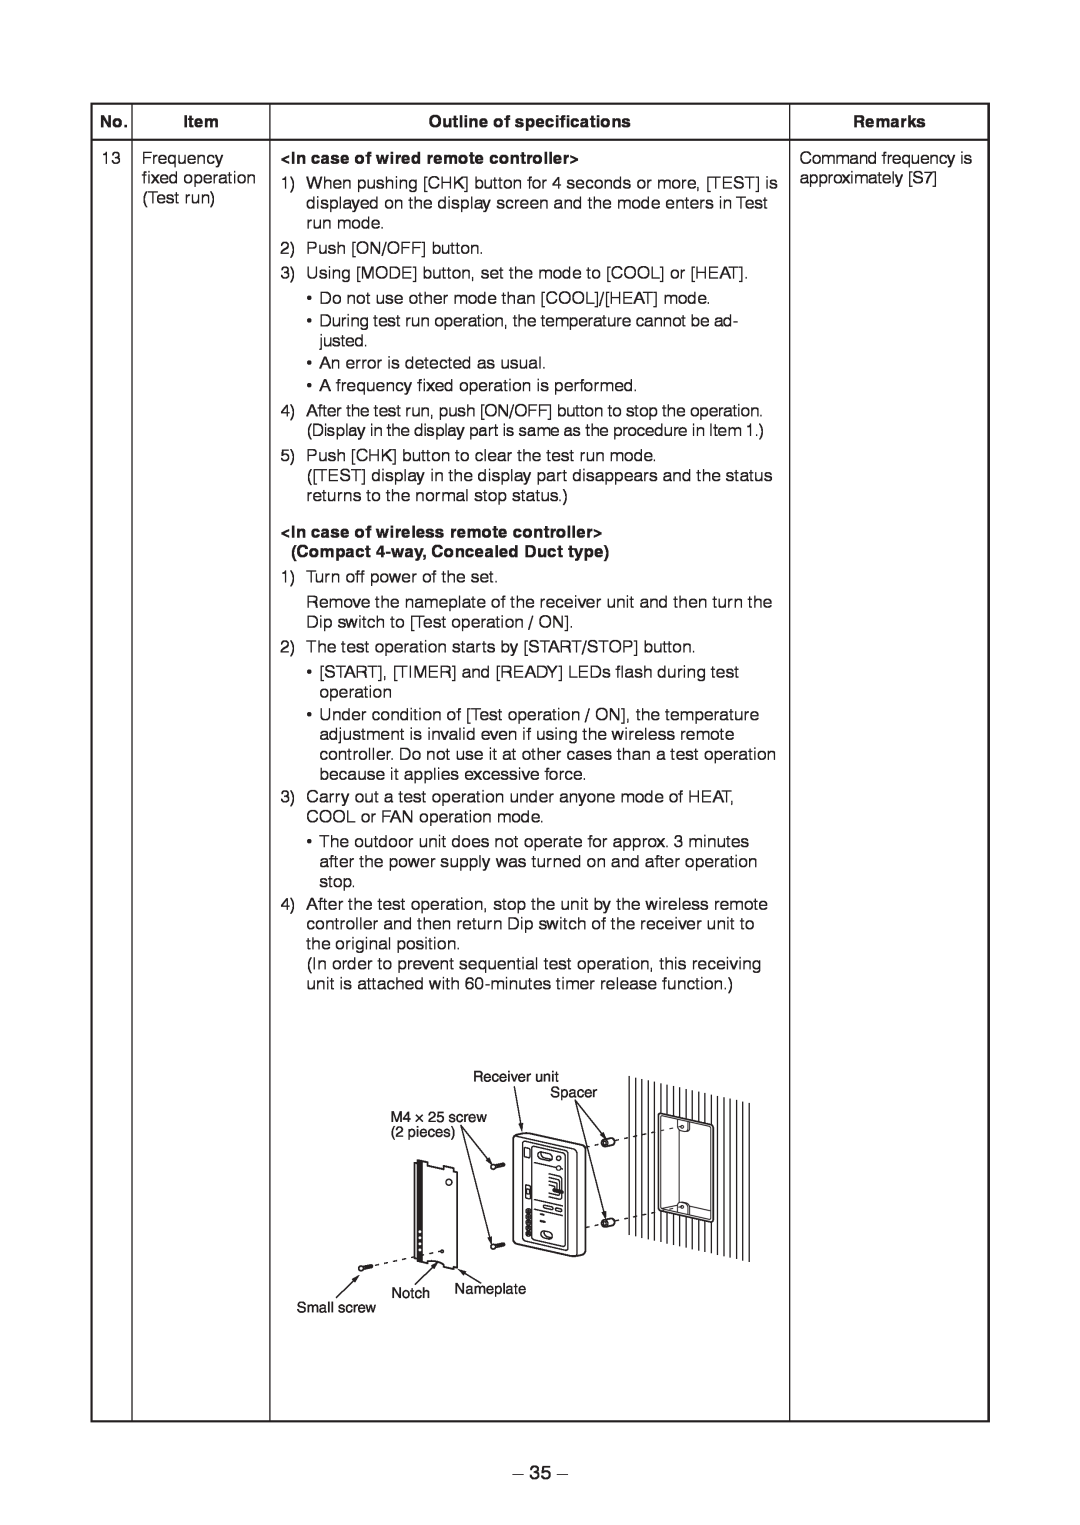 Toshiba CONCEALED DUCK TYPE, CEILING TYPE 35, Outline of specifications, Remarks, <In case of wired remote controller> 